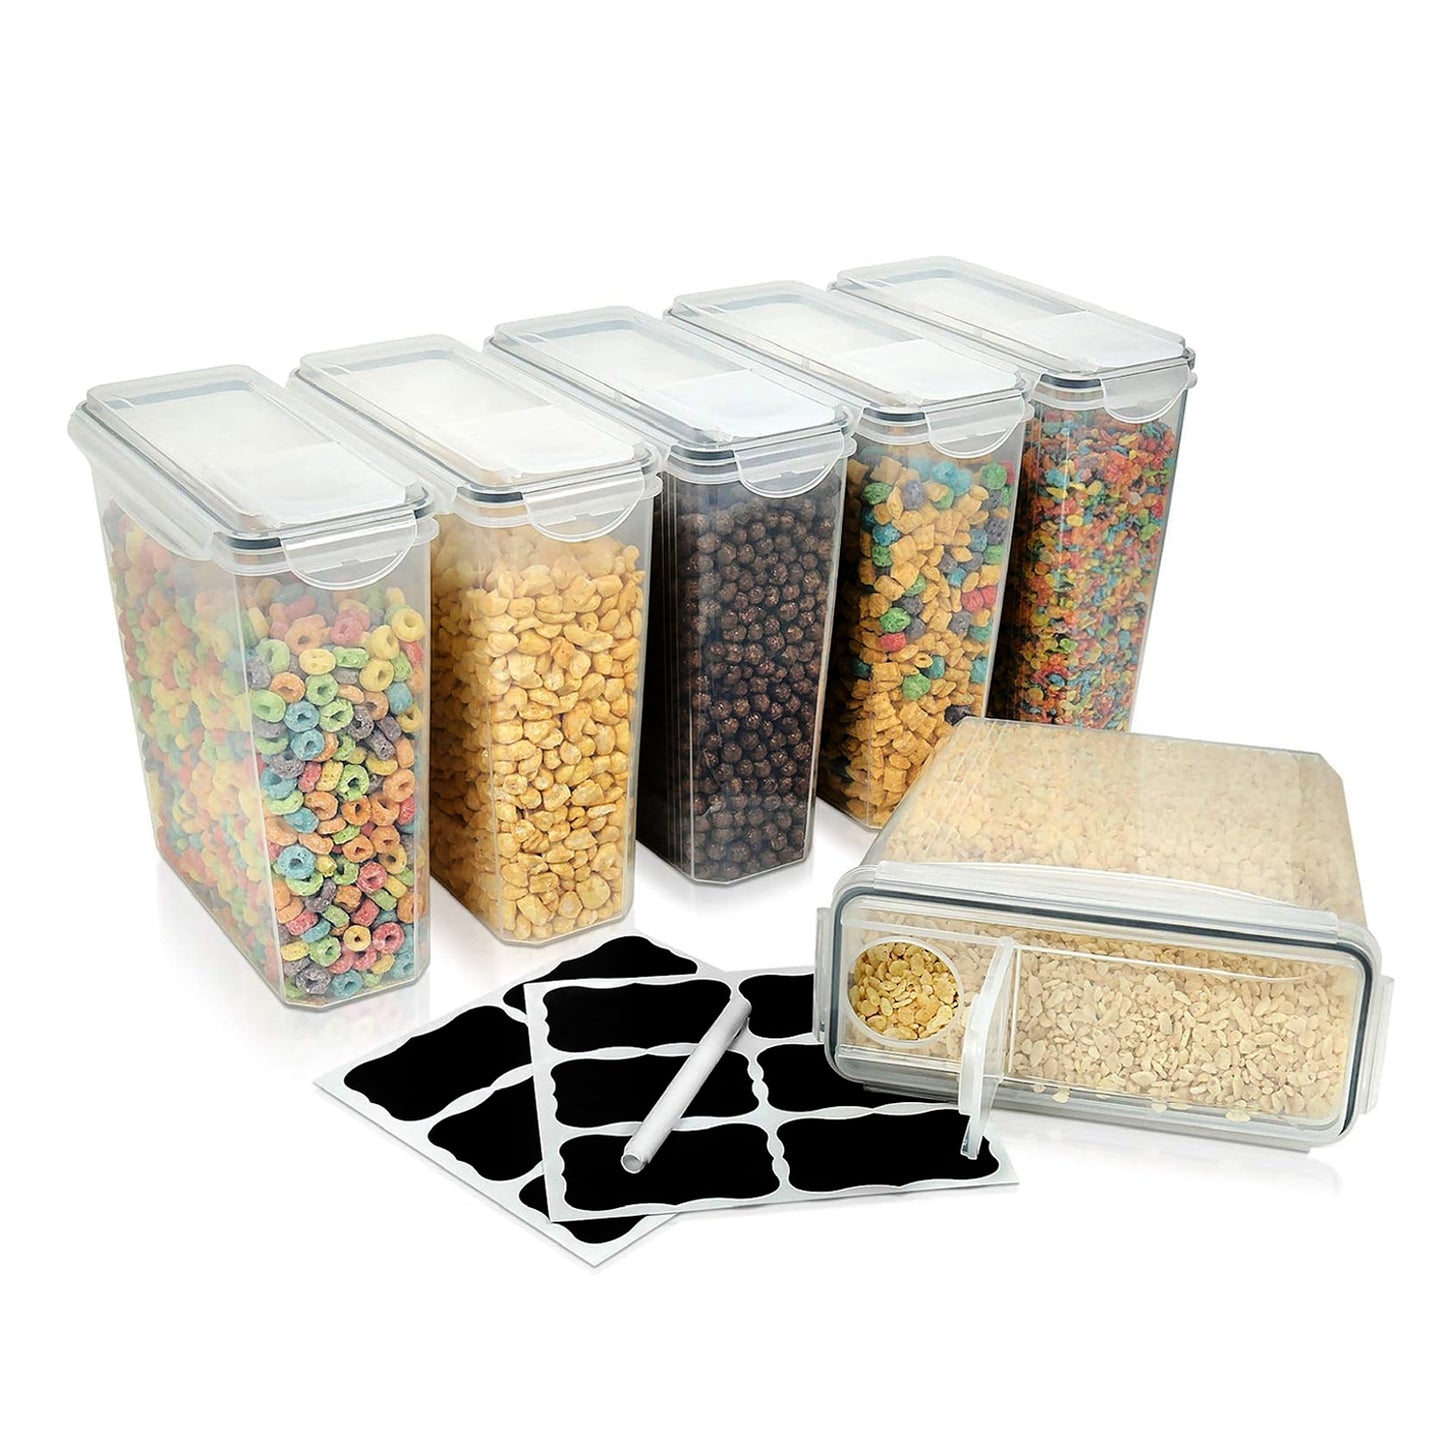 4L Cereal Containers Airtight Food Storage for Kitchen and Pantry Organization Canisters for, Dry Pet Food, Flour, Sugar, Rice, Nuts, Snacks & More